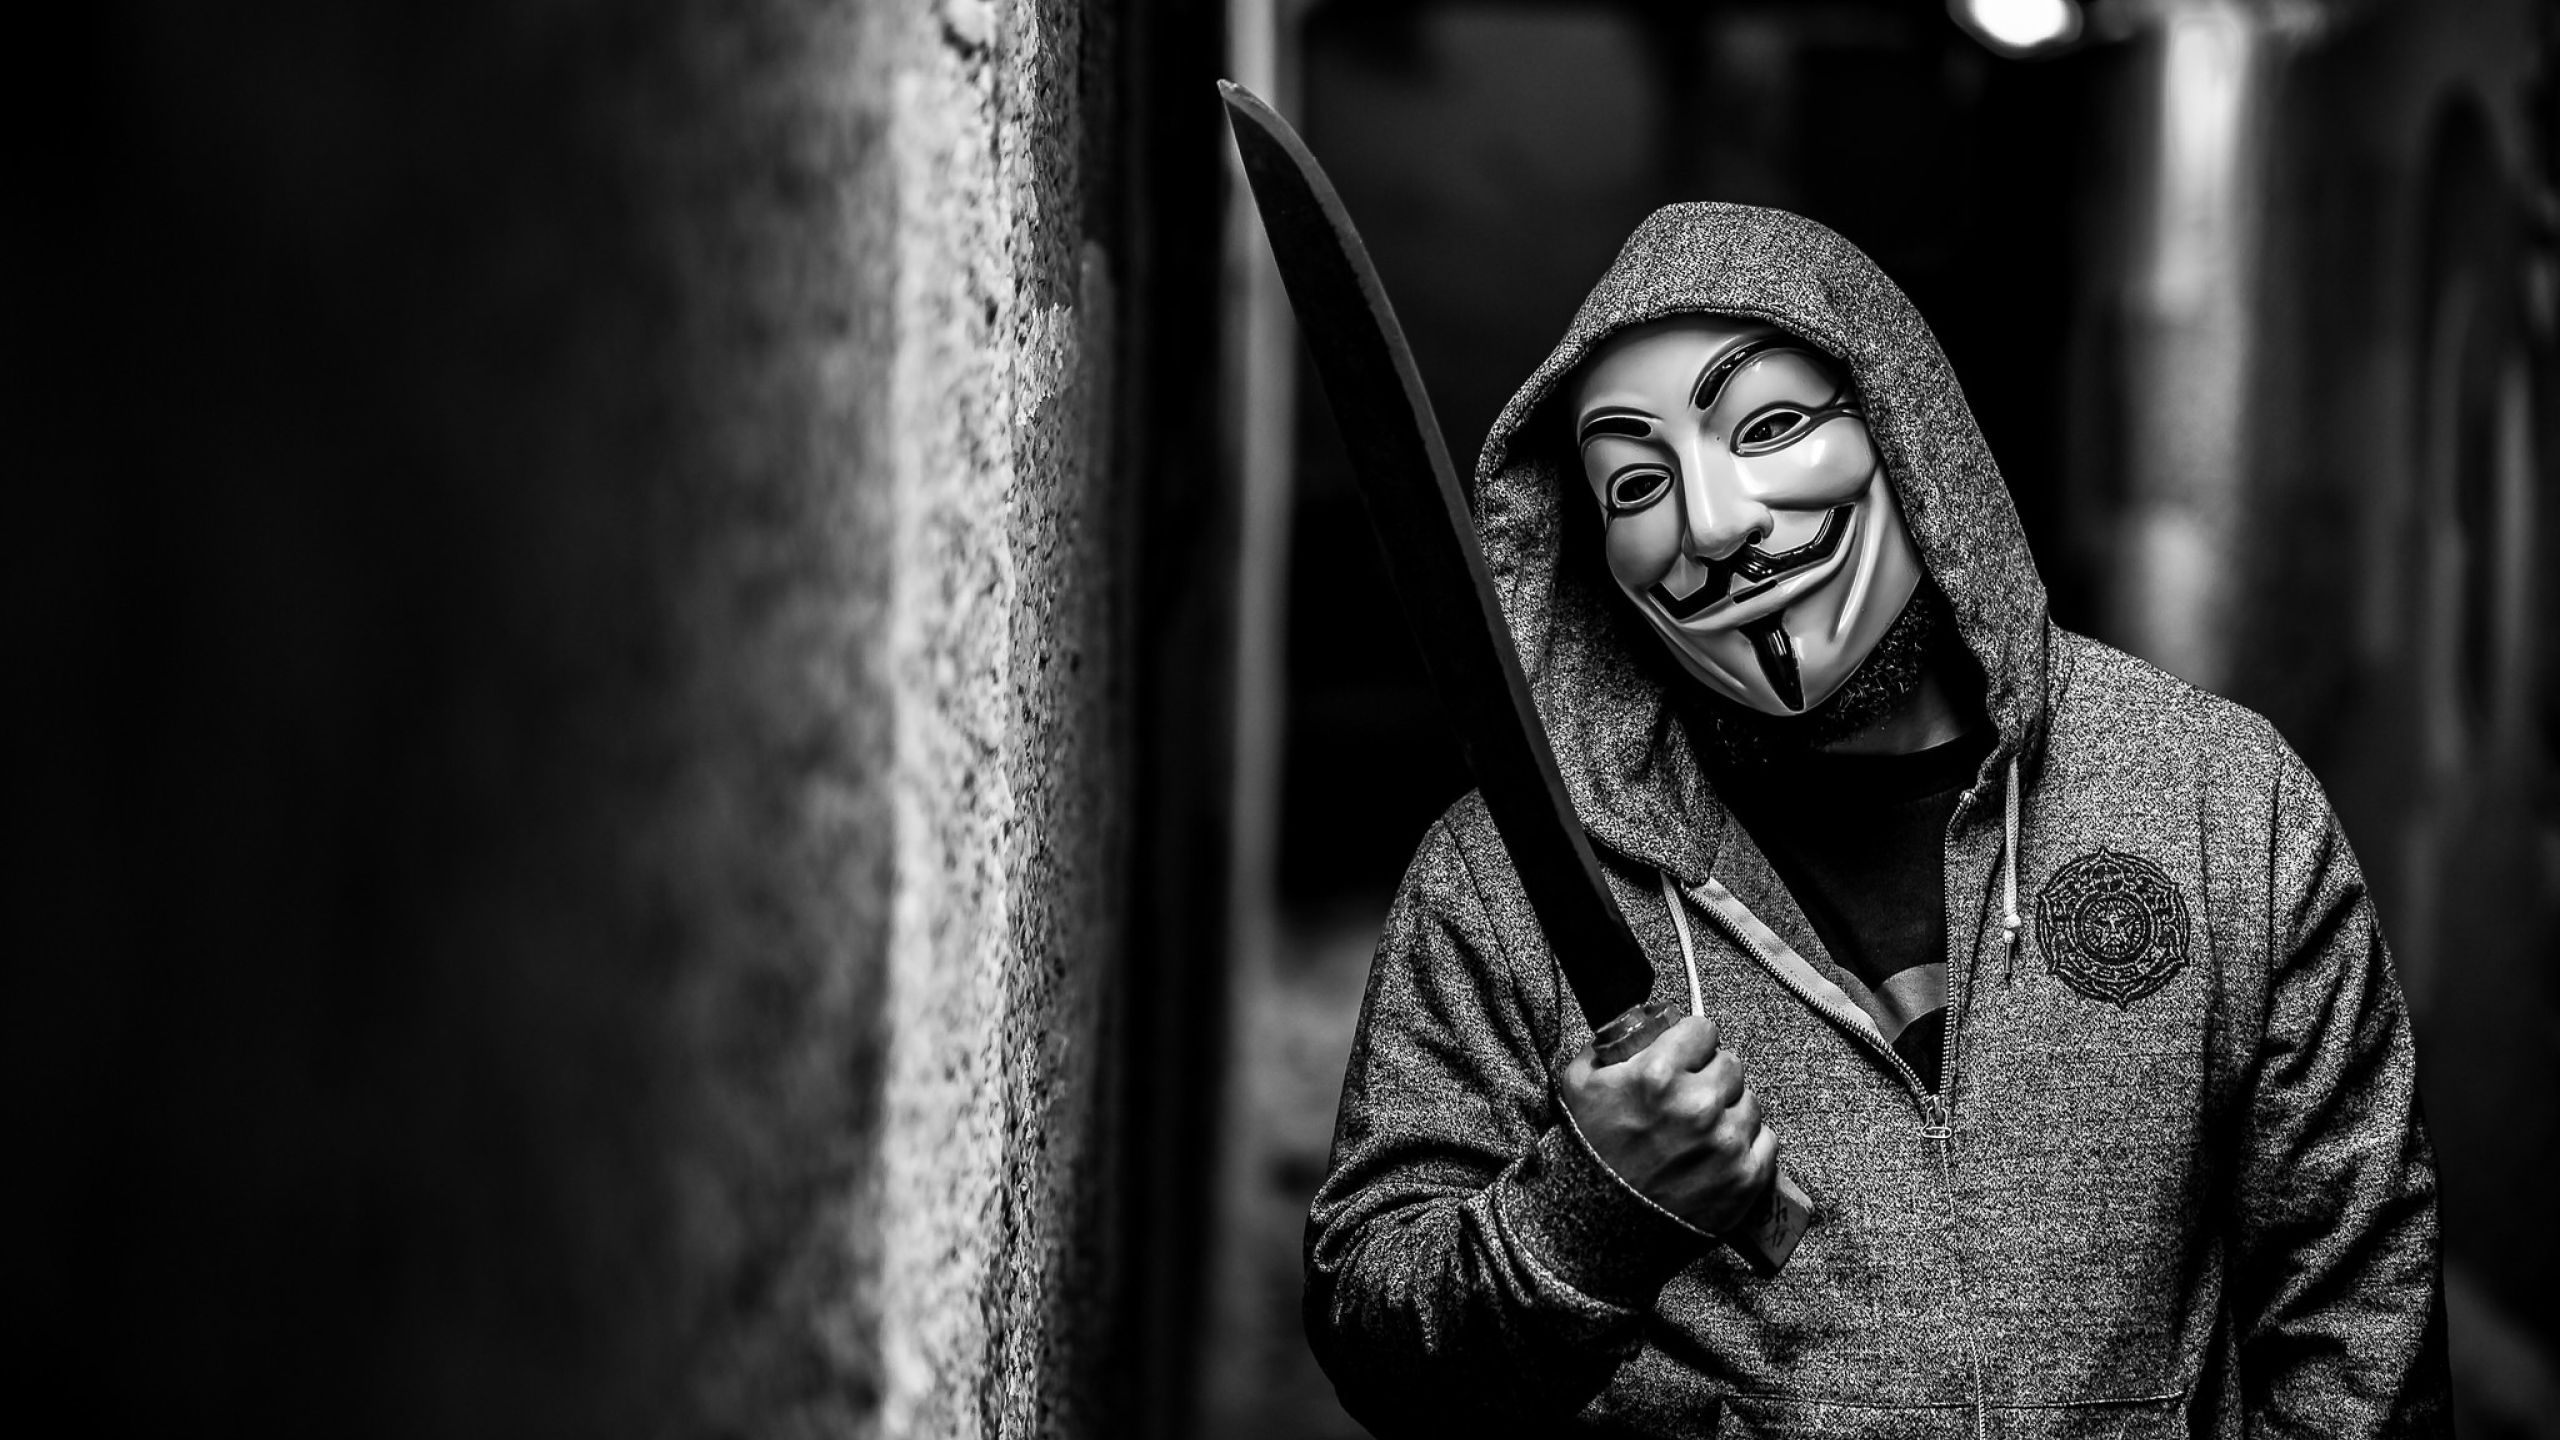 anonymous, guy fawkes mask, mask 1440P Resolution